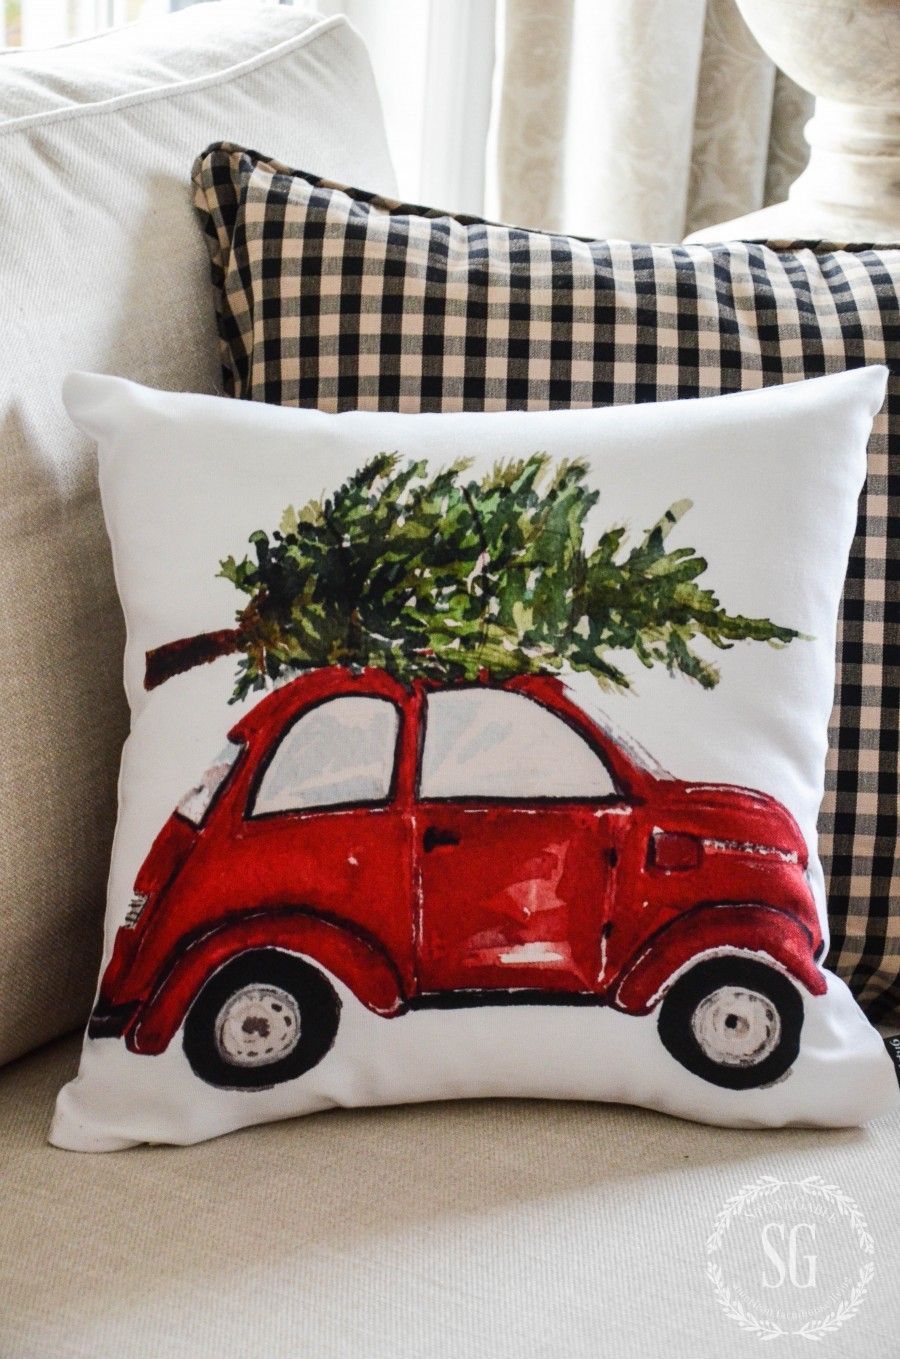 CHRISTMAS PILLOW LOVE. Decorate your home with festive Christmas Pillows. Here&#39